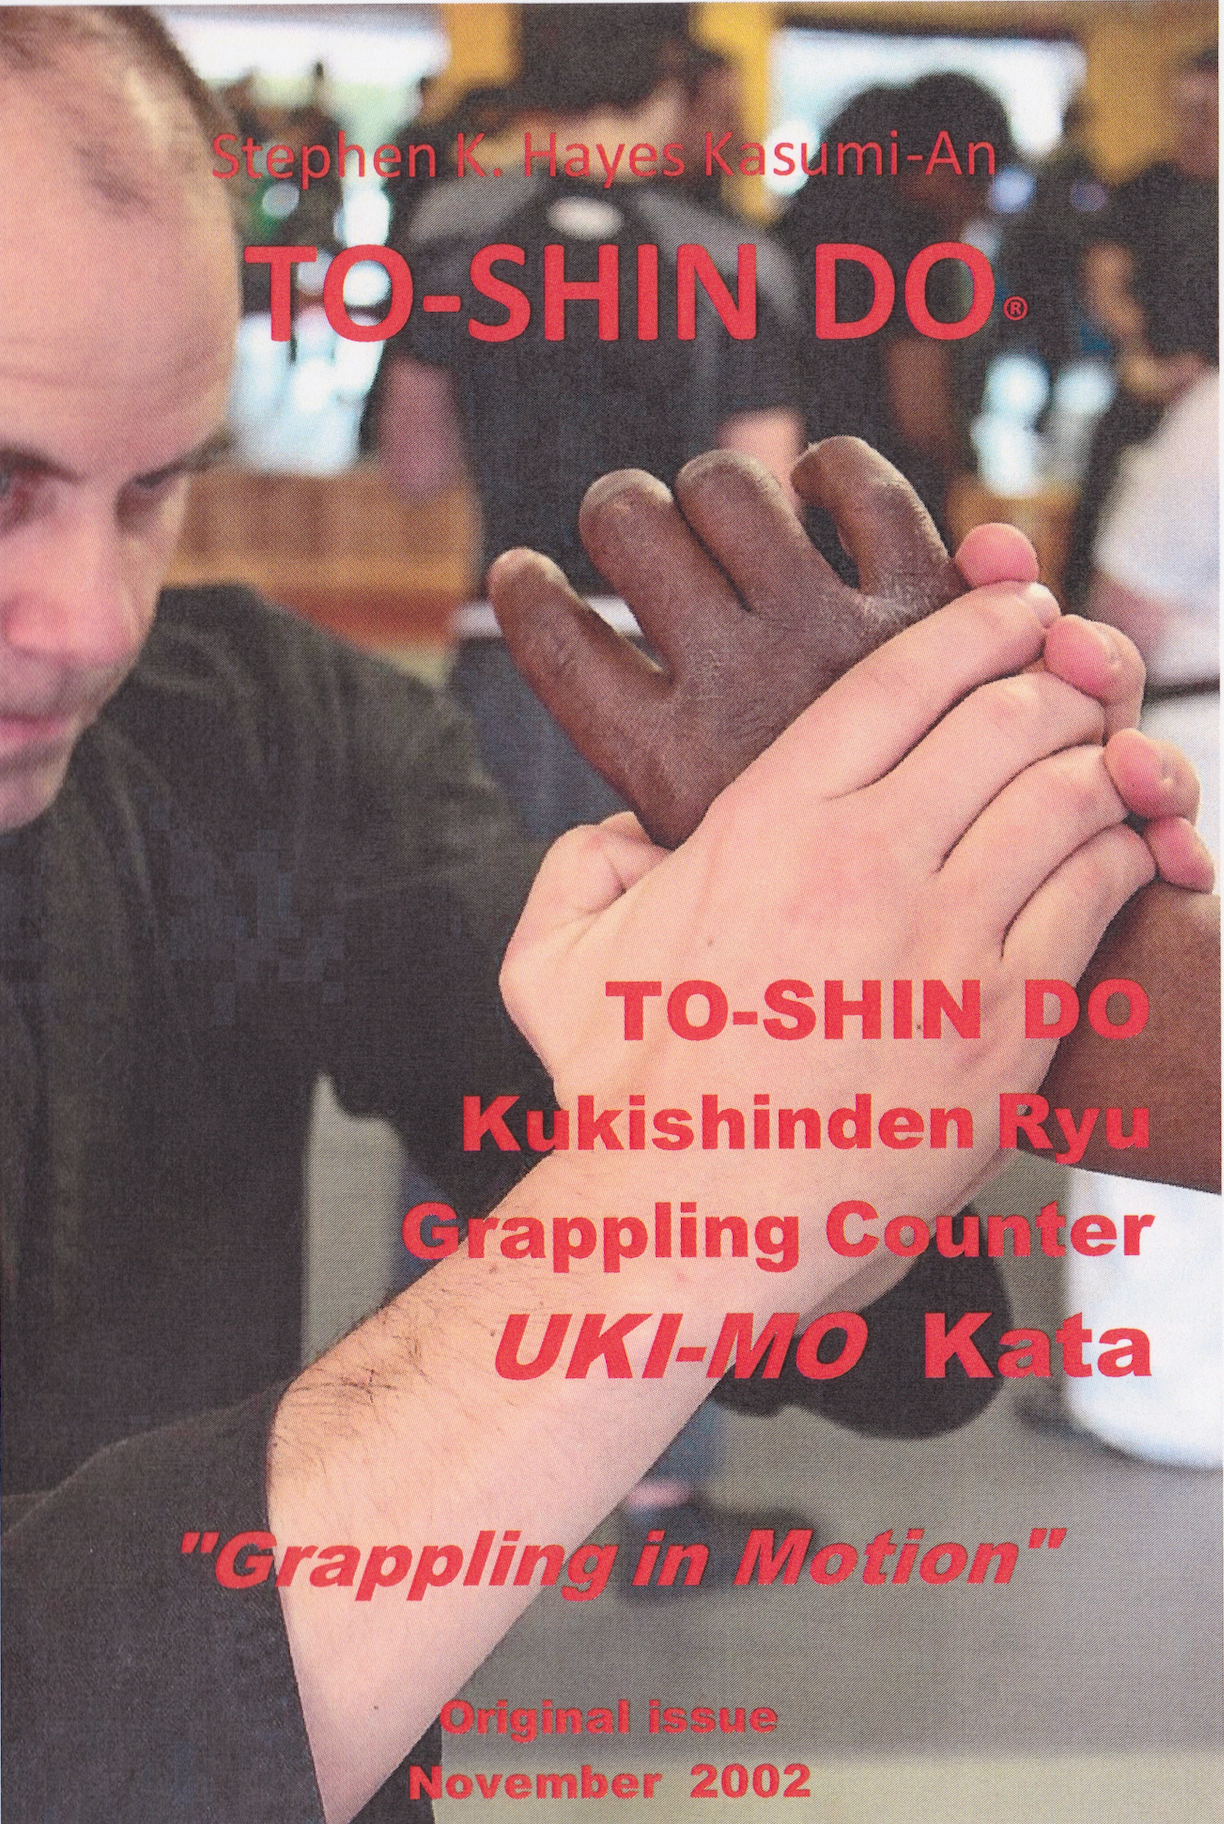 Kukishinden Ryu Grappling Counters DVD with Stephen Hayes